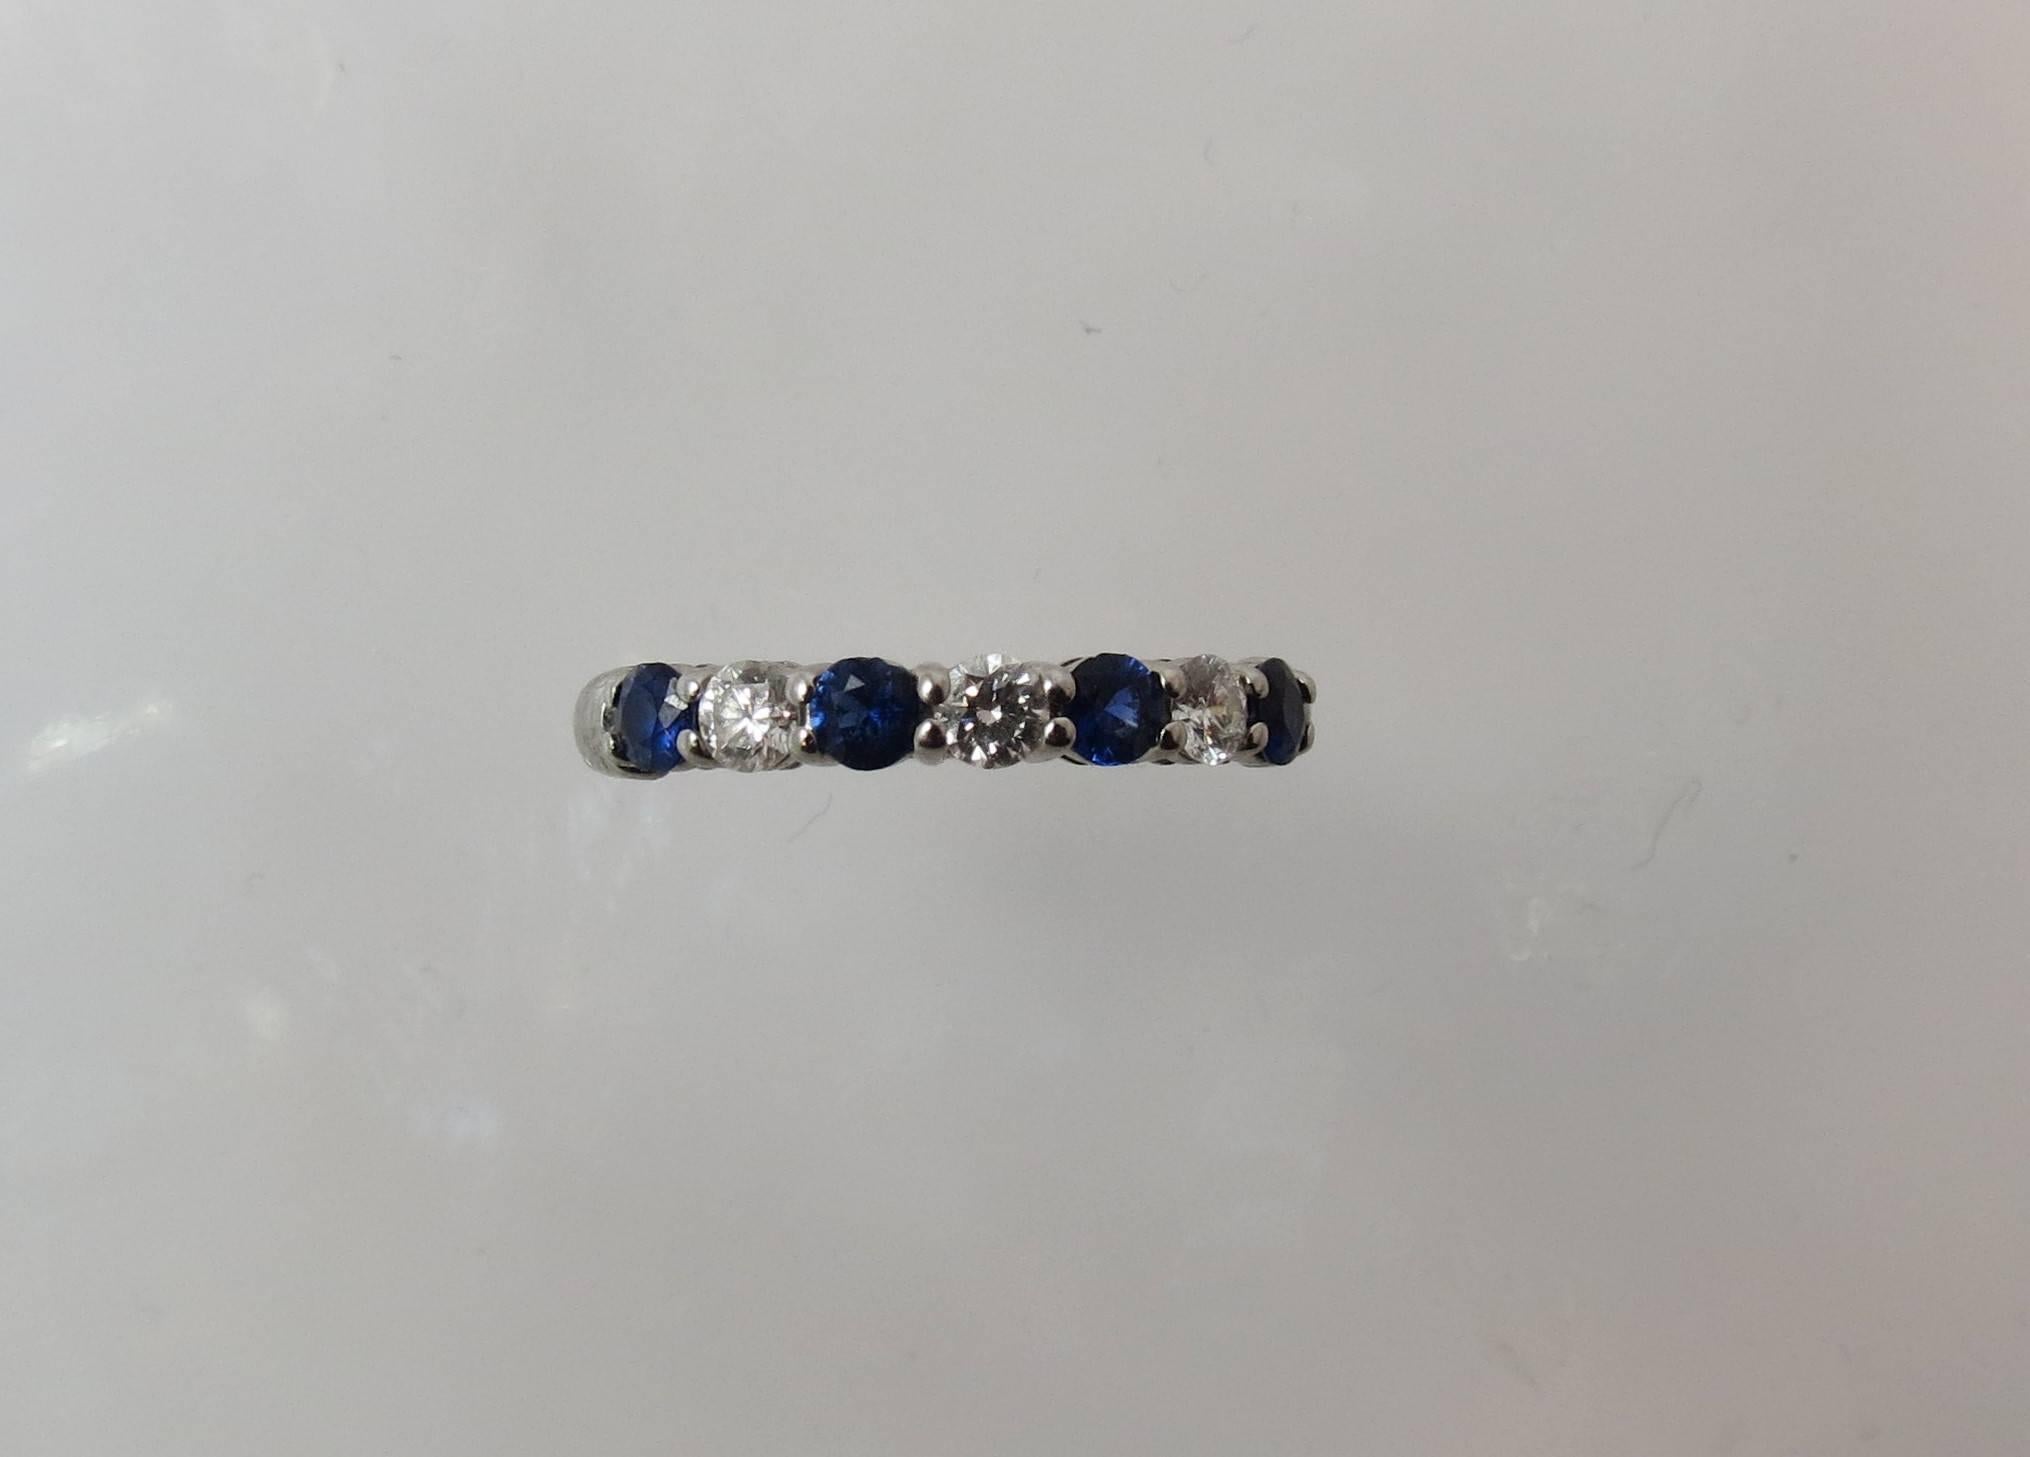 Tiffany shared-setting band ring with a half circle of round blue sapphires weighing .40cts total and round brilliant diamonds weighing .24cts total,  in platinum, 3mm wide setting

Current Tiffany retail is $4675